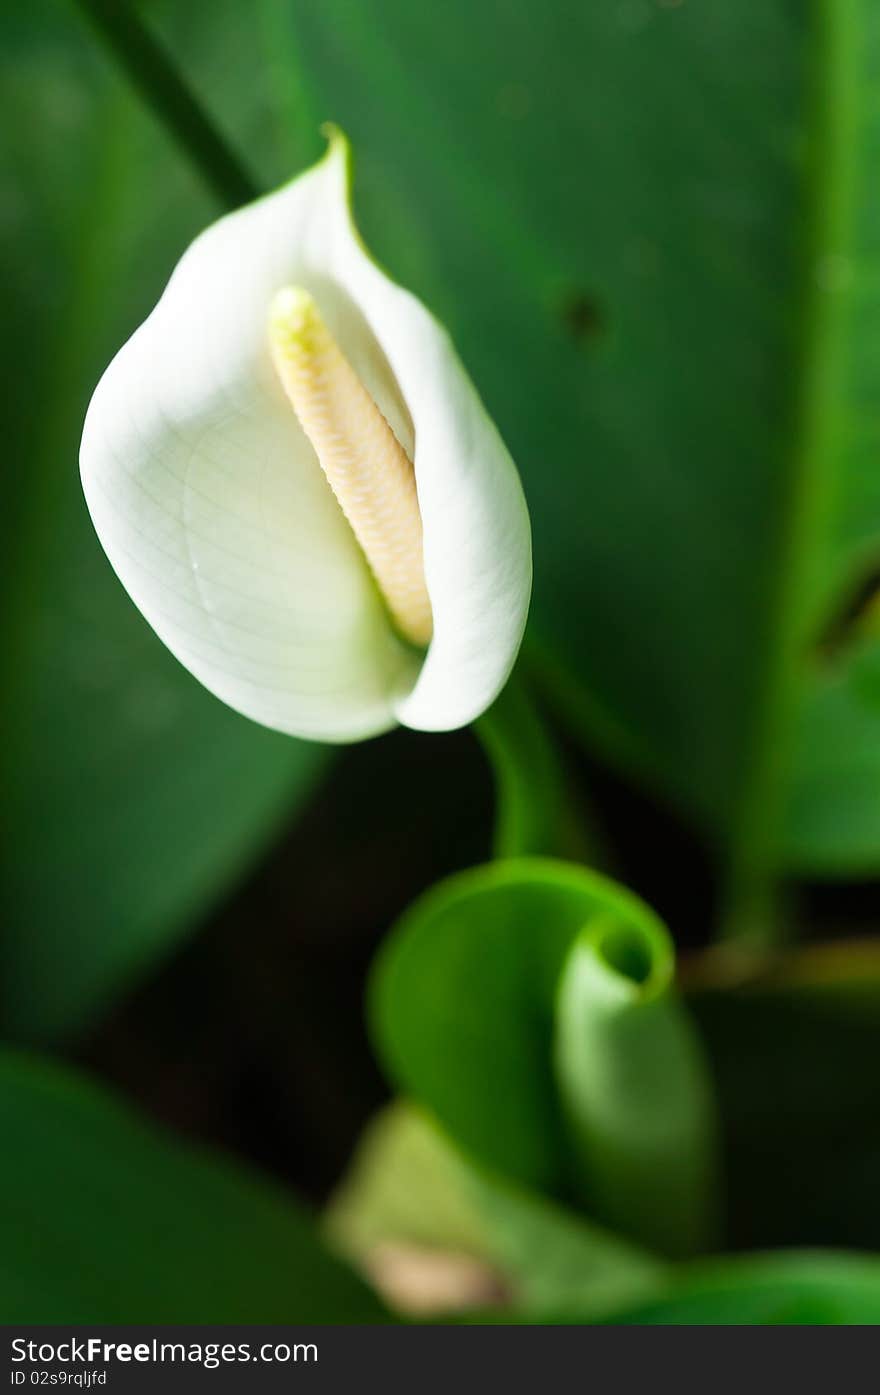 The Curl Leaf and Blossom of Calla Lily. The Curl Leaf and Blossom of Calla Lily